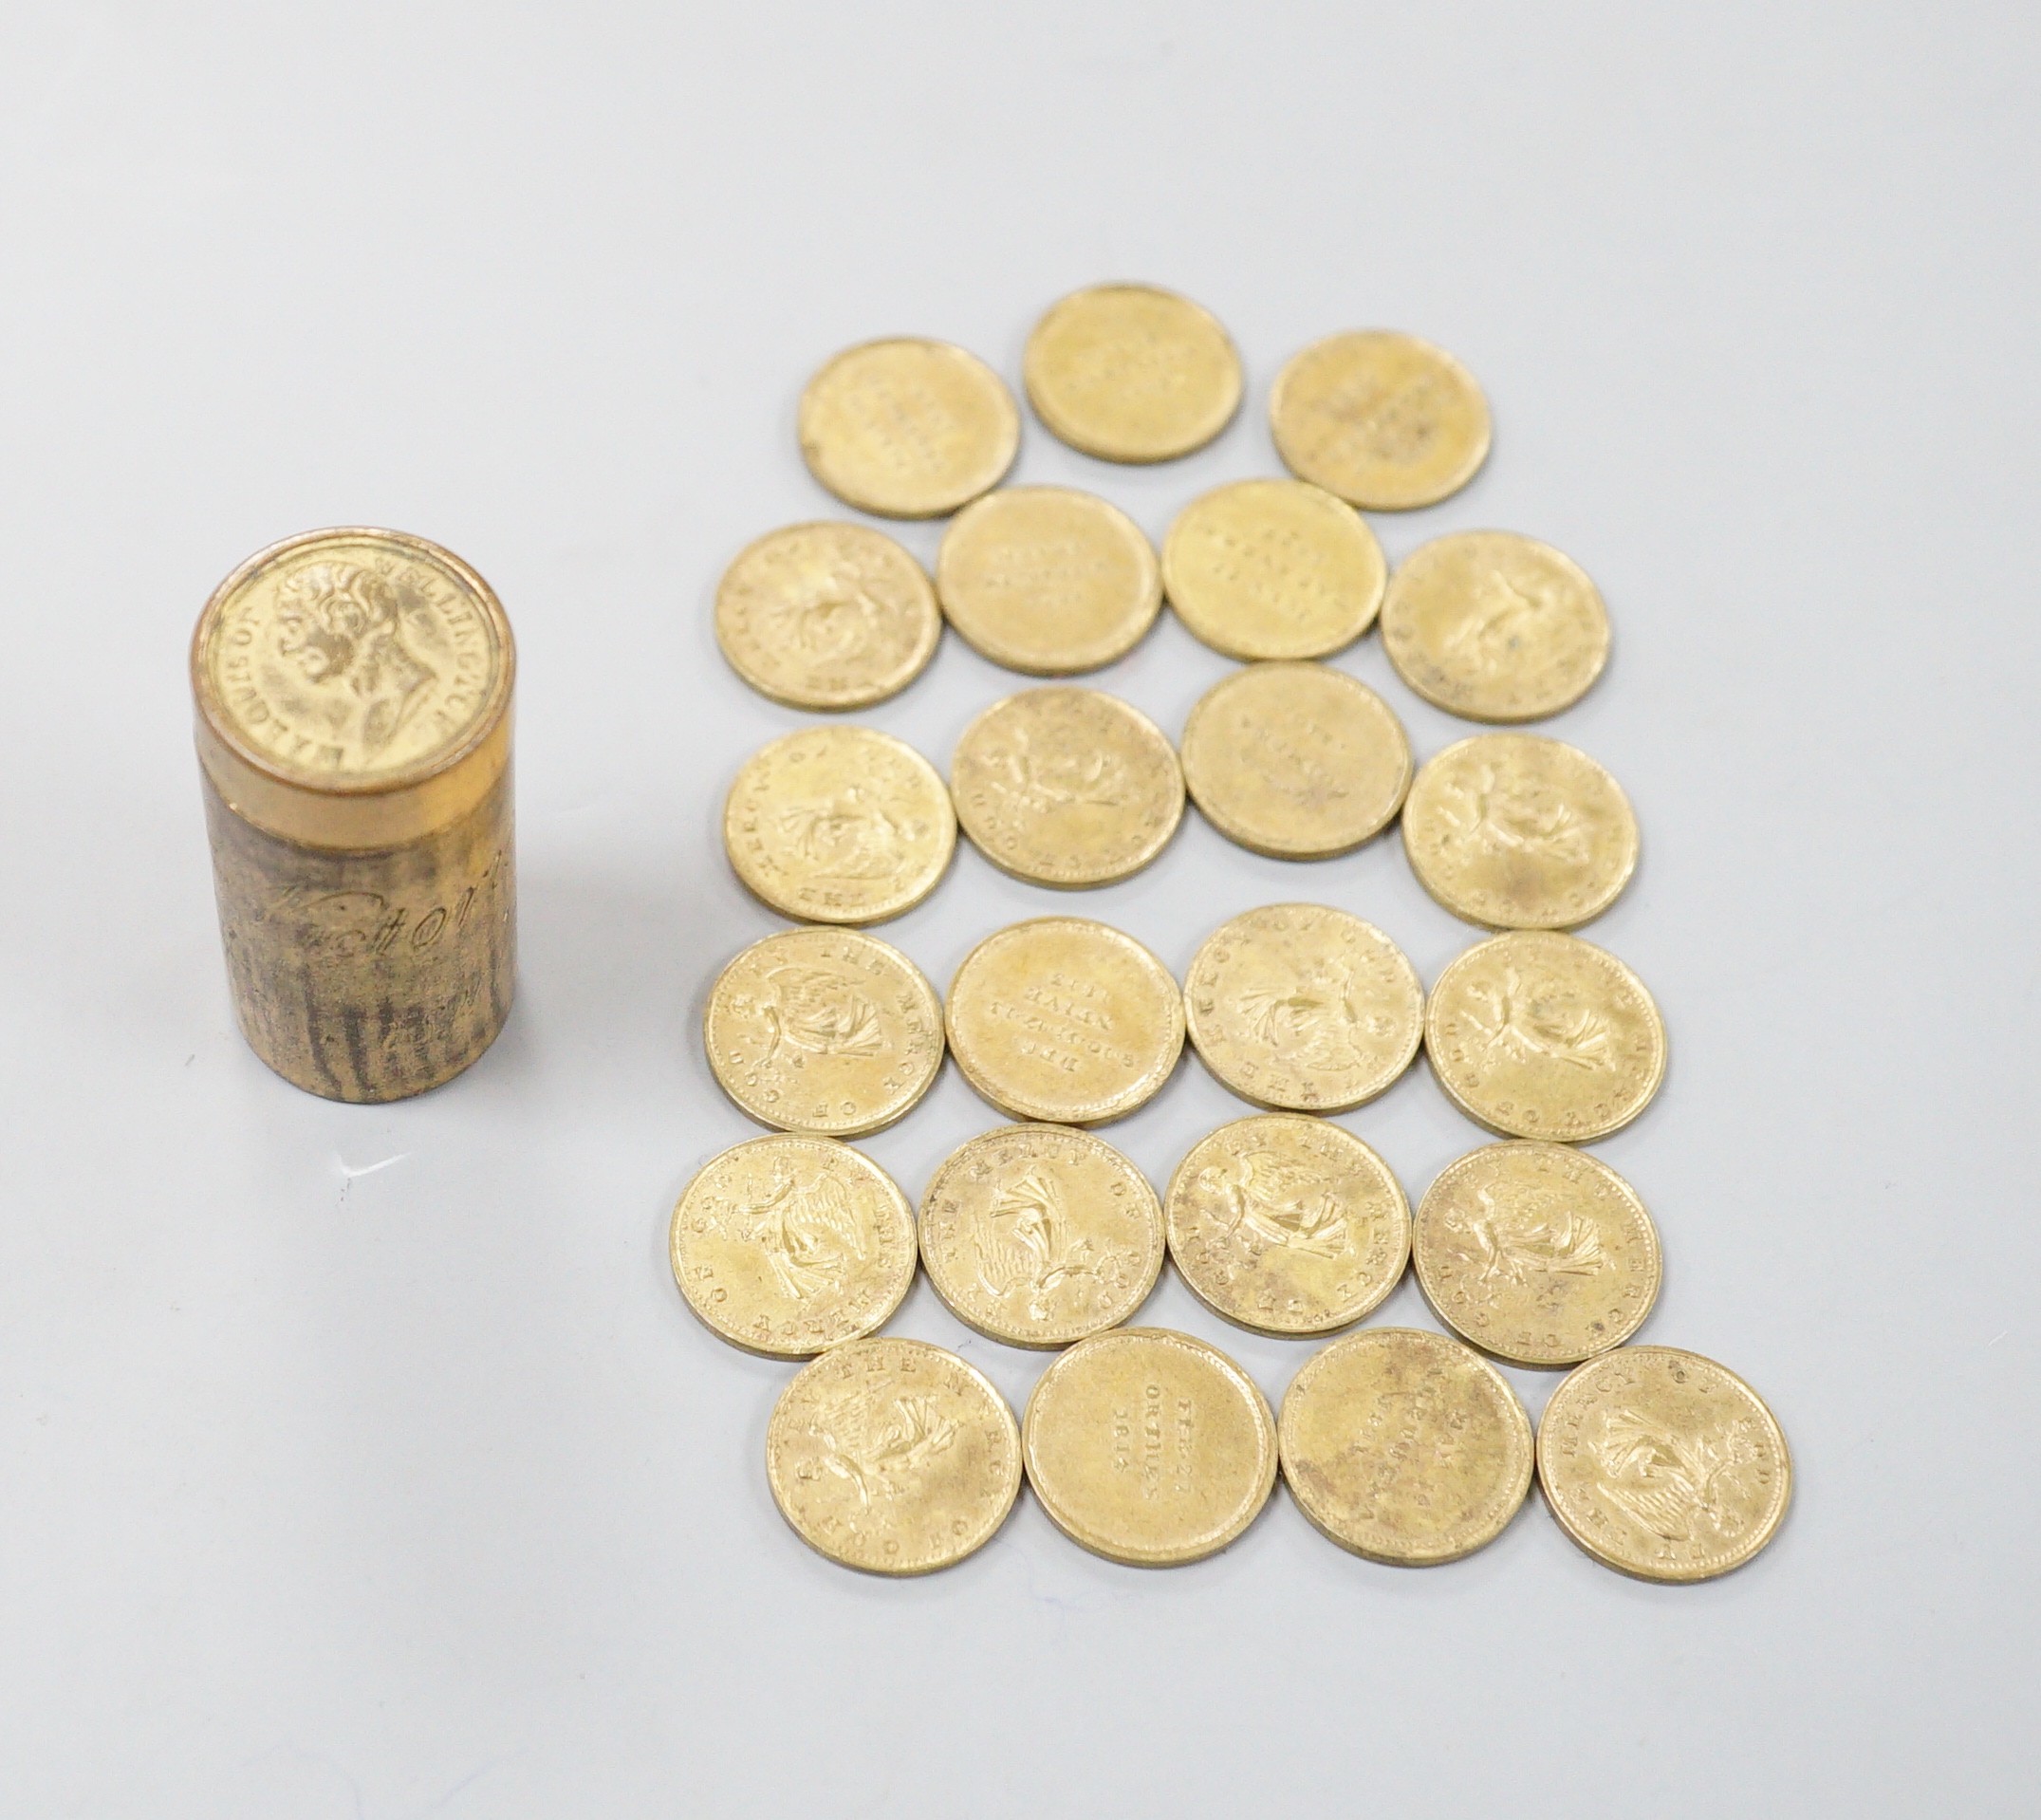 ‘Marquis of Wellington’ British Victories in the Peninsular Campaign cylindrical brass box by Thomason & Jones, containing 23 gilt medallions depicting Winged Victory and the date of a Peninsular battle